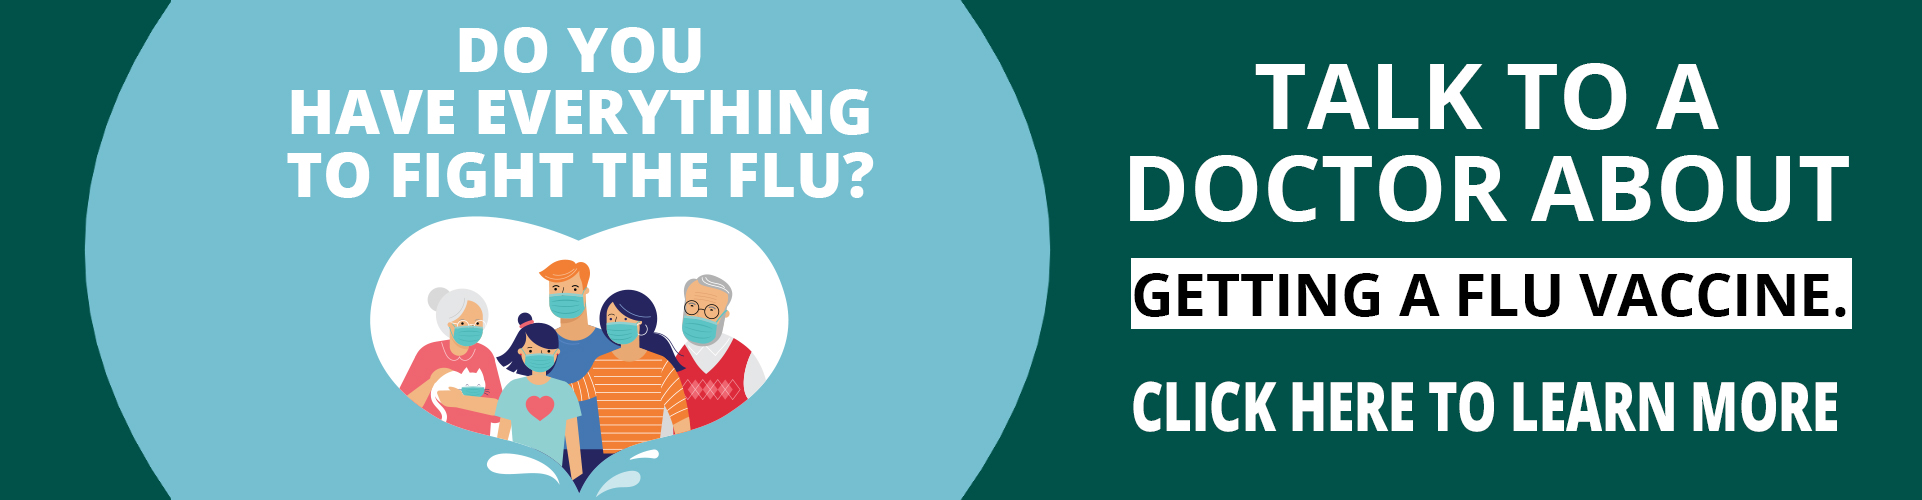 DO YOU HAVE EVERYTHING TO FIGHT THE FLU?

TALK TO A DOCTOR ABOUT GETTING A FLU VACCINE.

CLICK HERE TO LEARN MORE